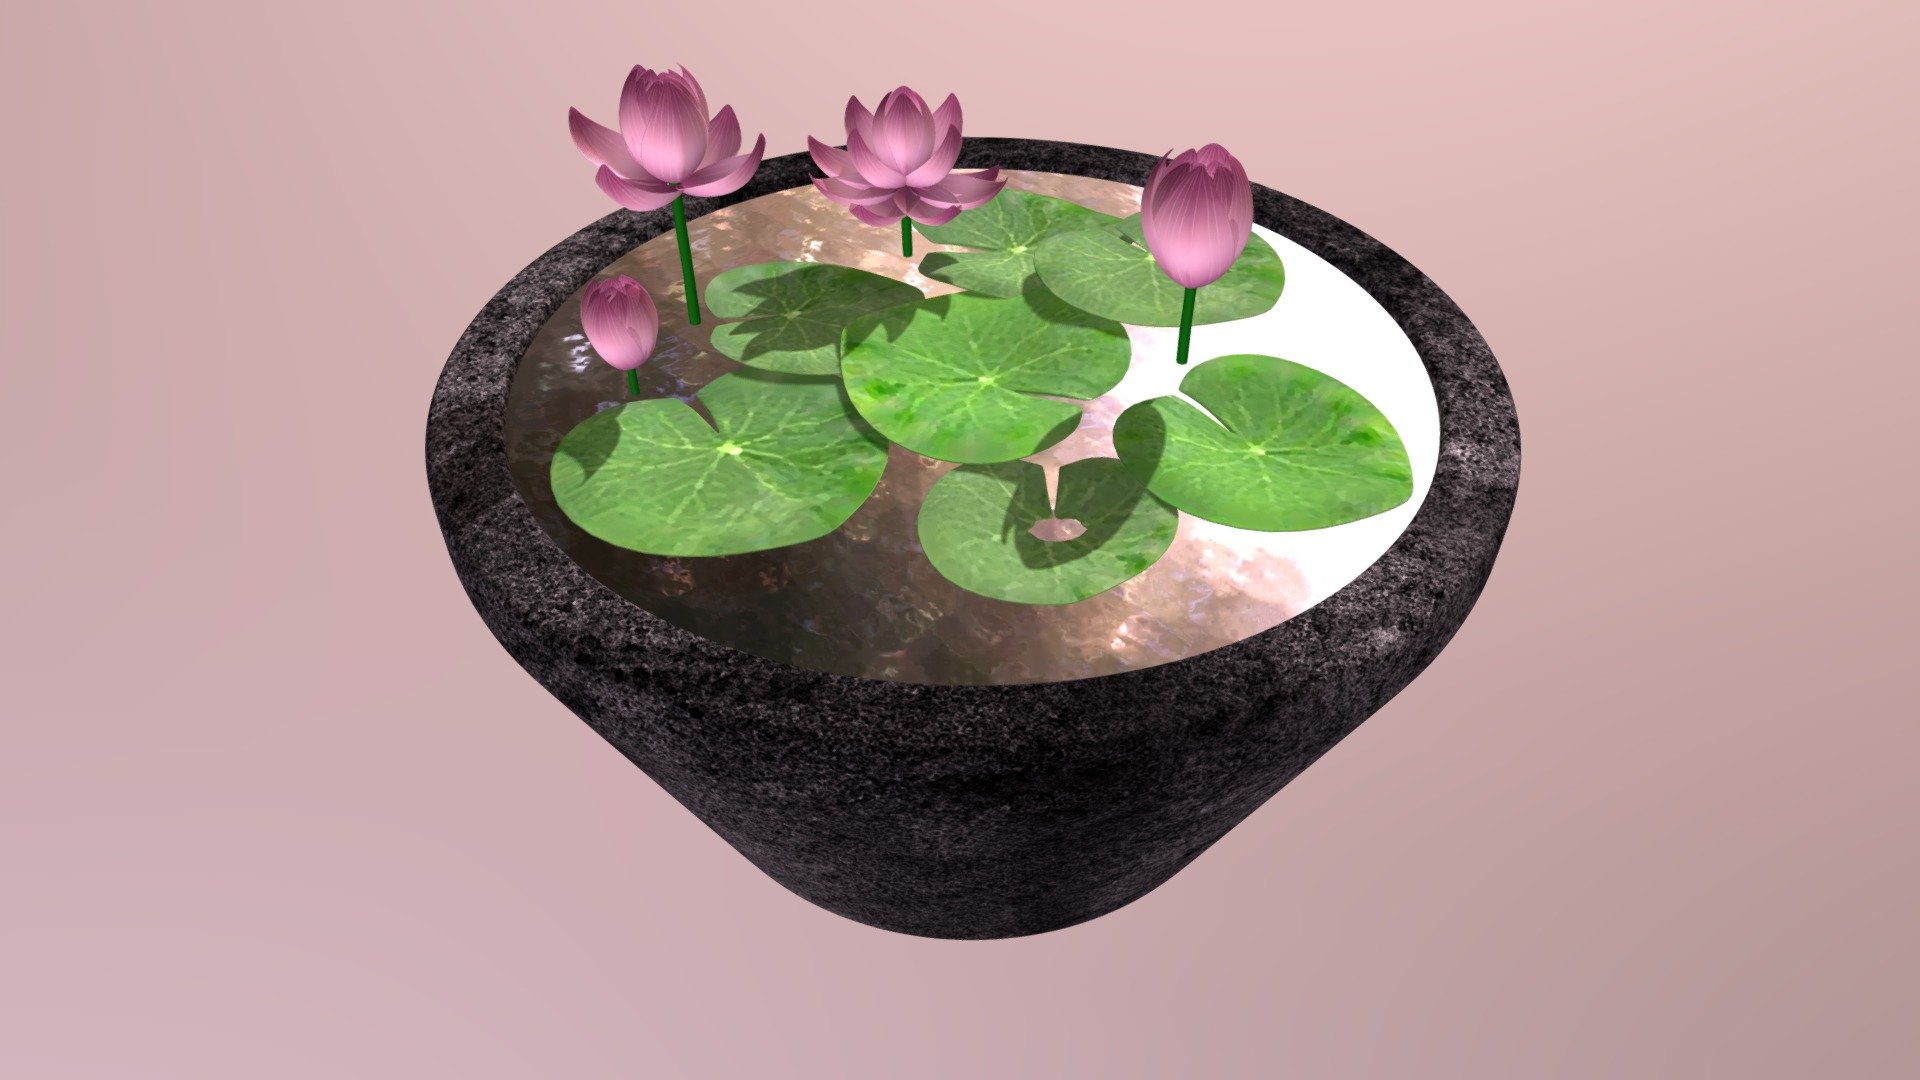 3D Model of blooming lotus flowers in a concrete pot 3d model